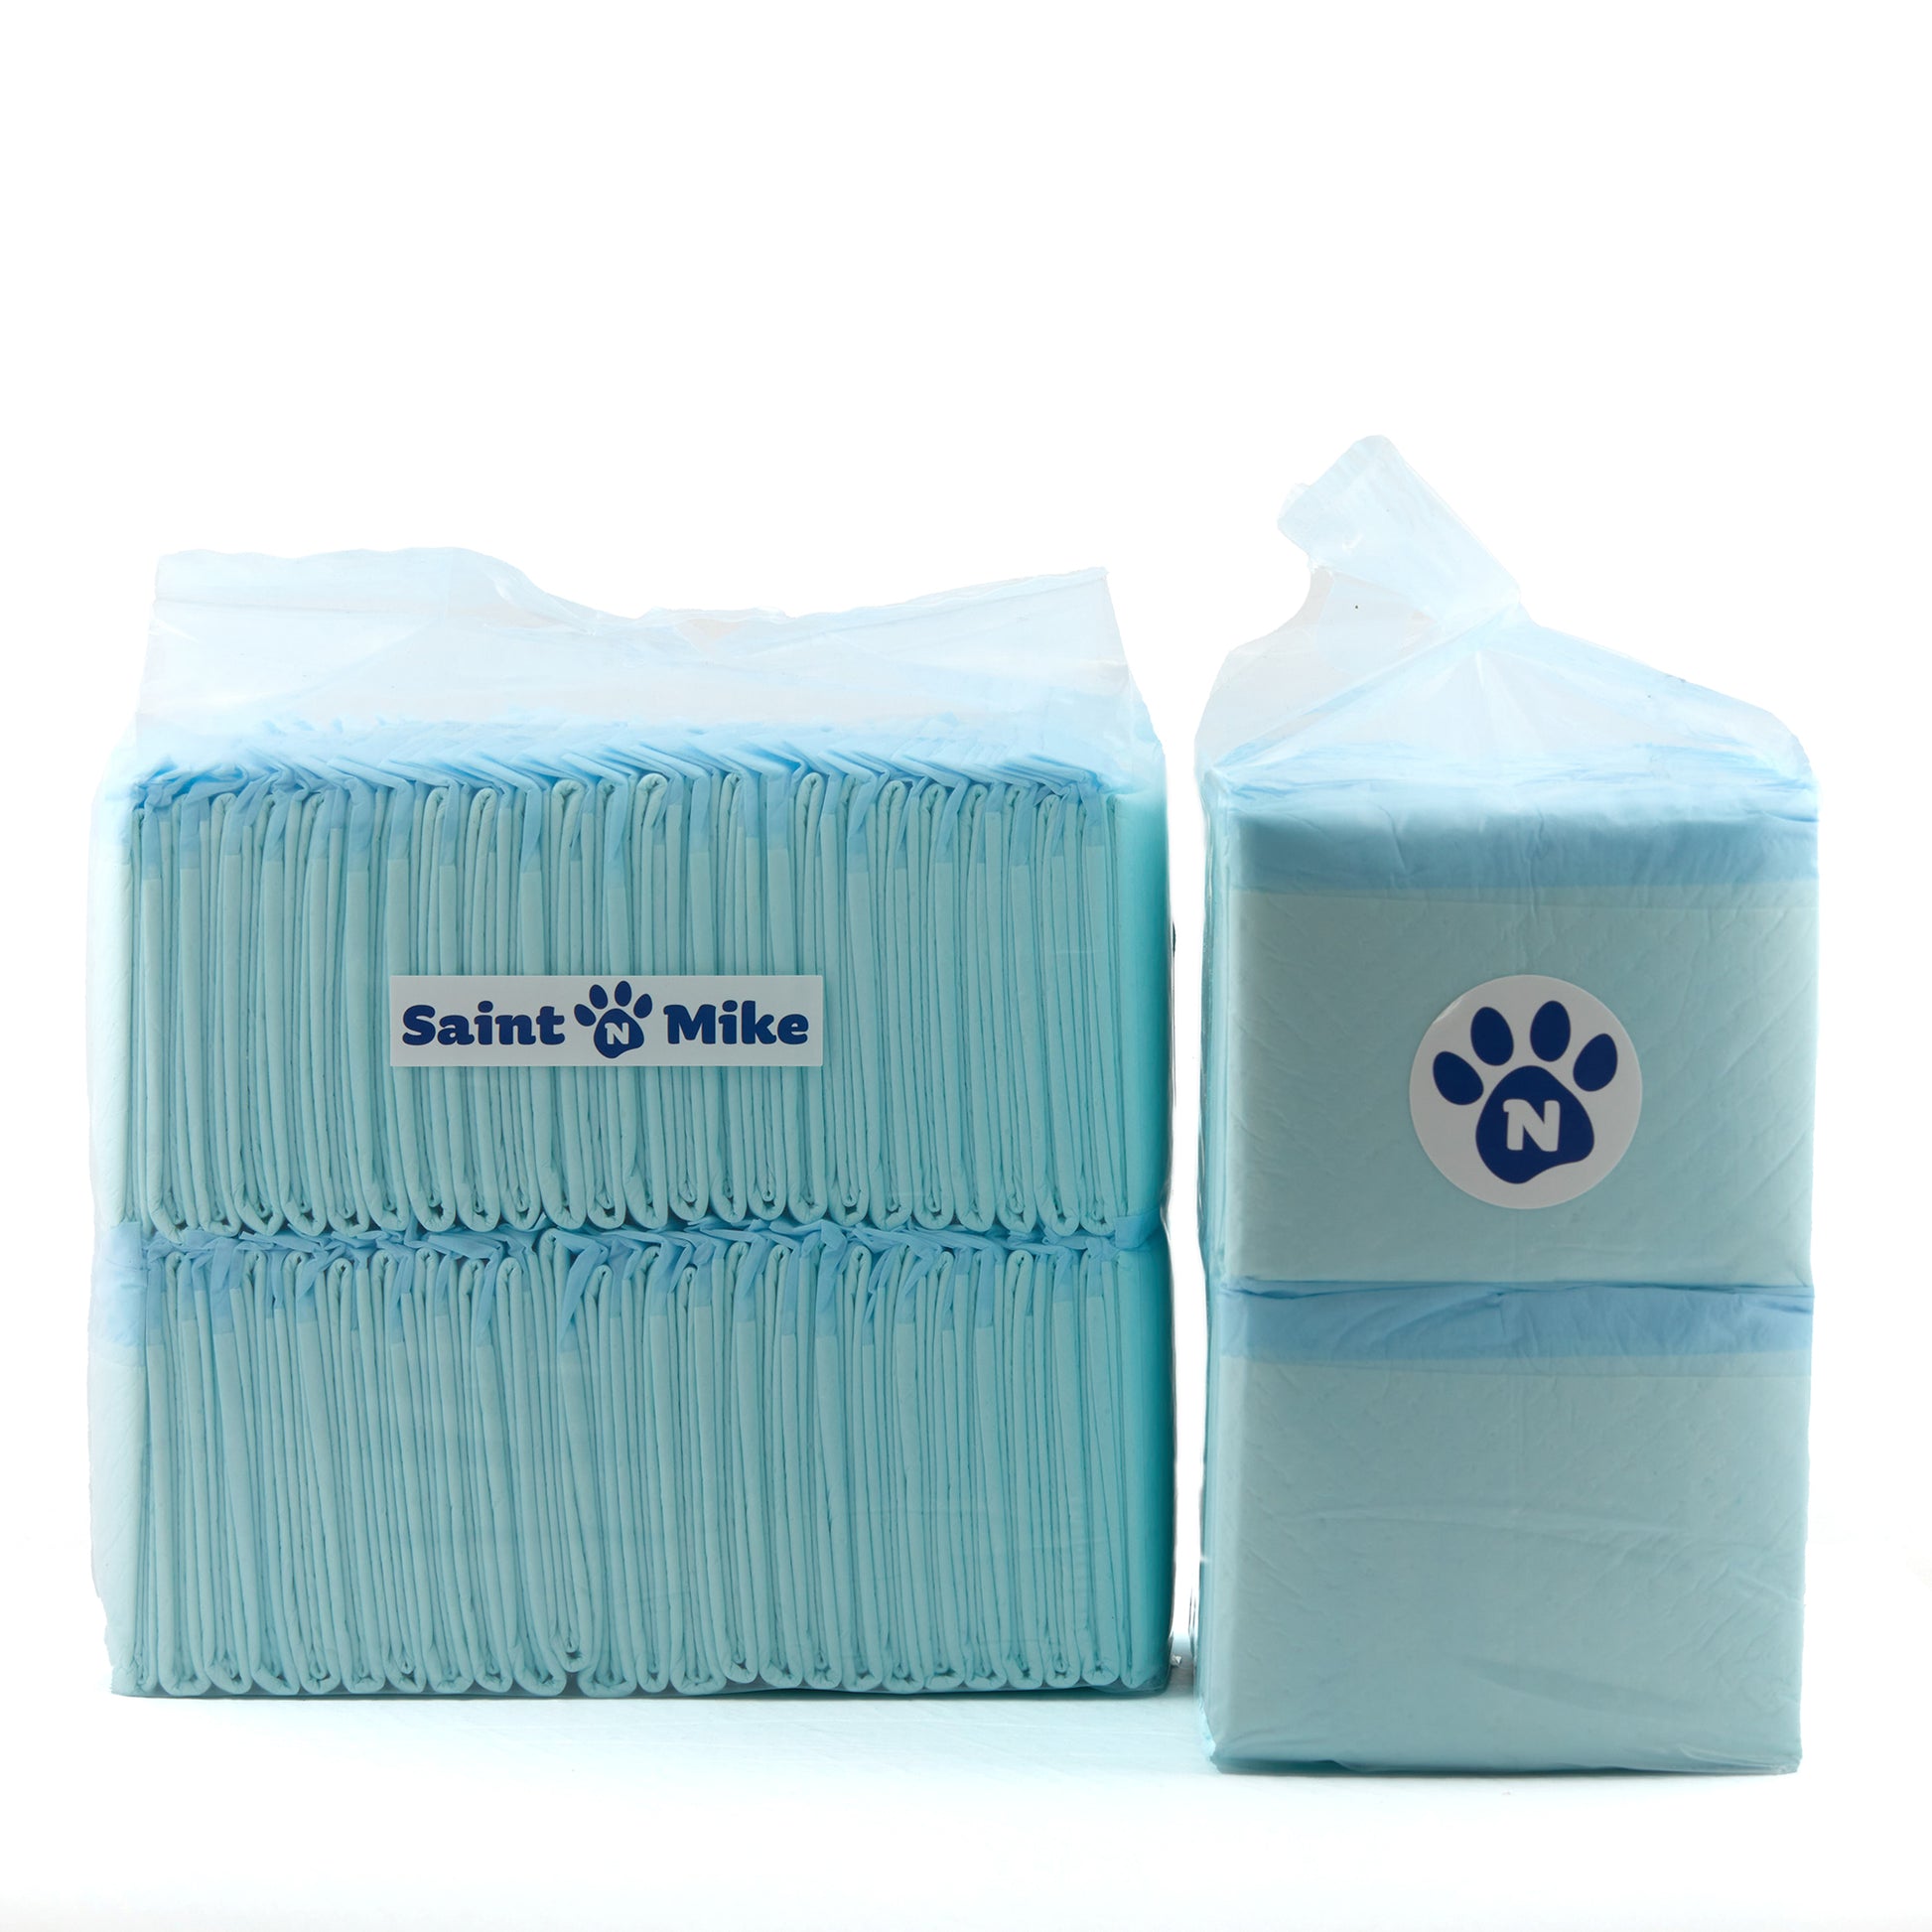 combo deal, high-quality puppy pad and eco-friendly dogs waste bags 100pcs of regular size puppy pads7